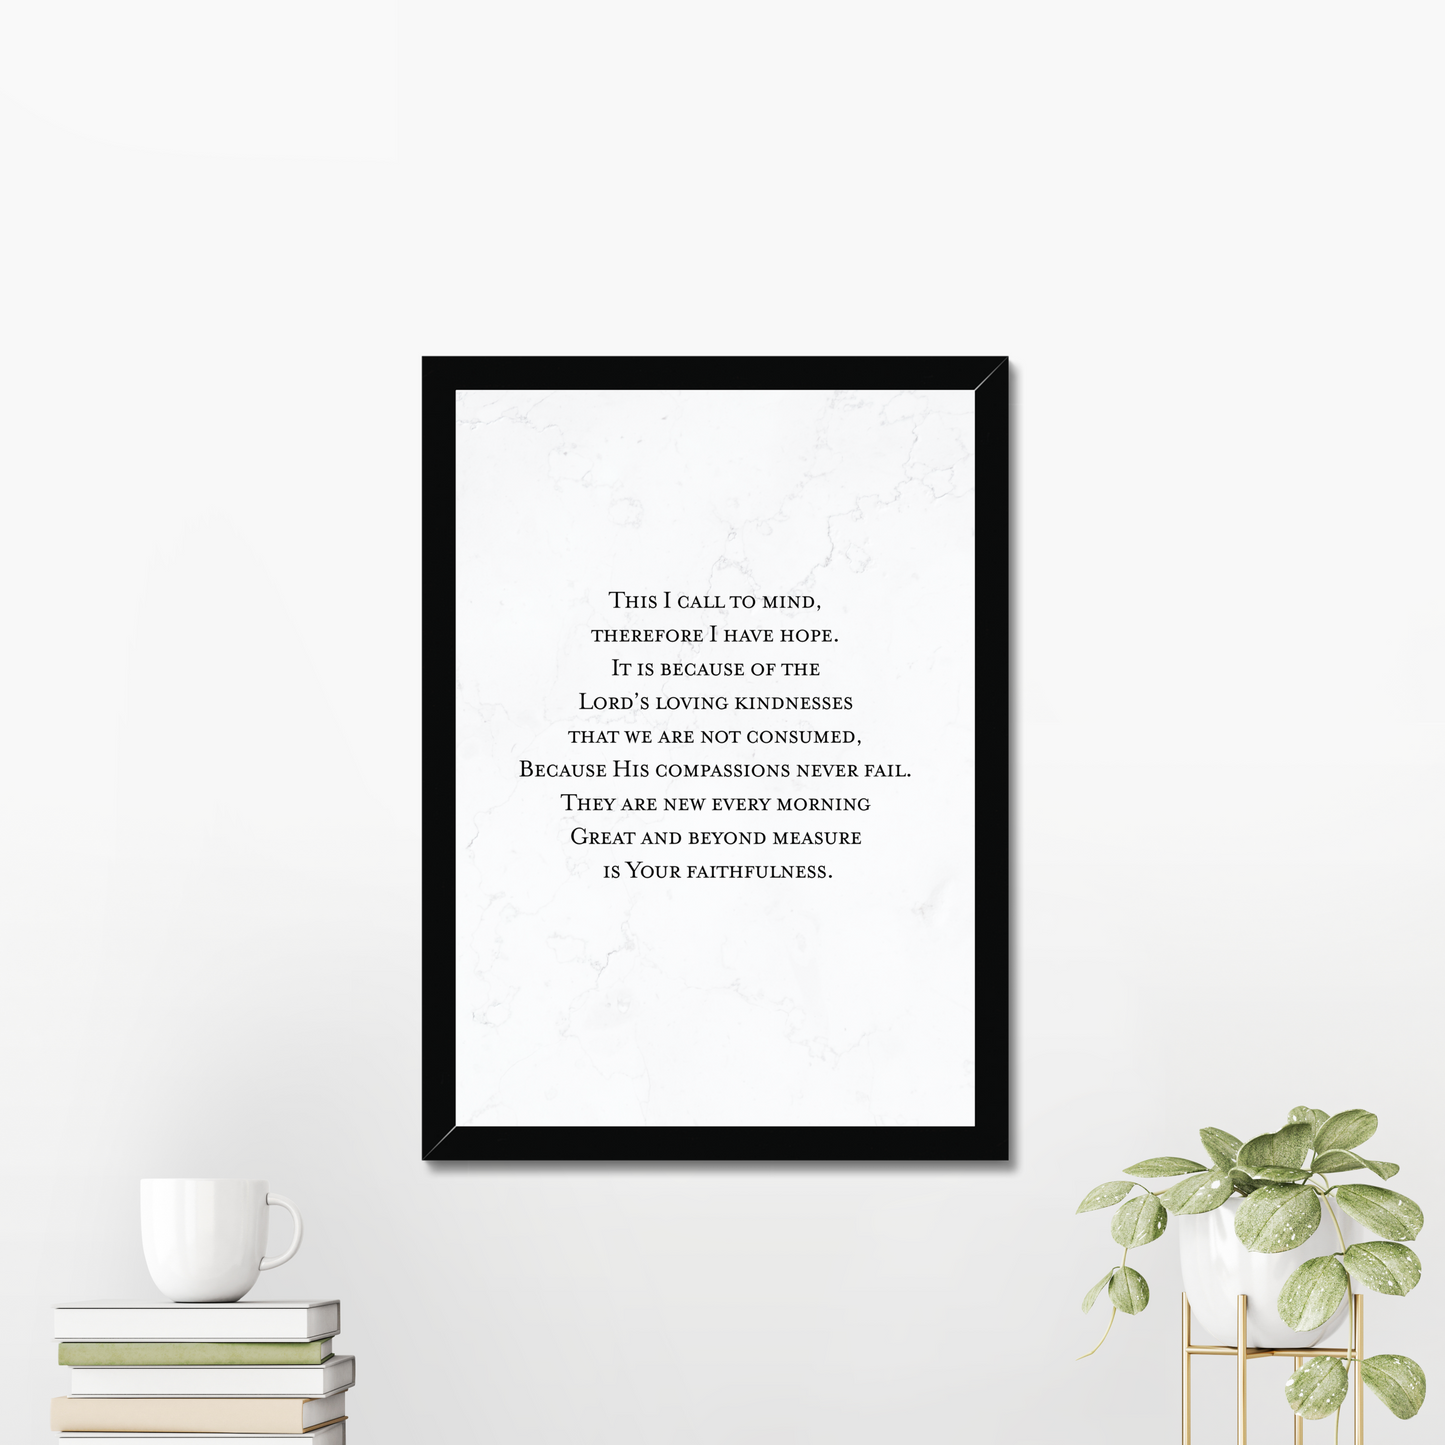 New every morning print - Faith Curated